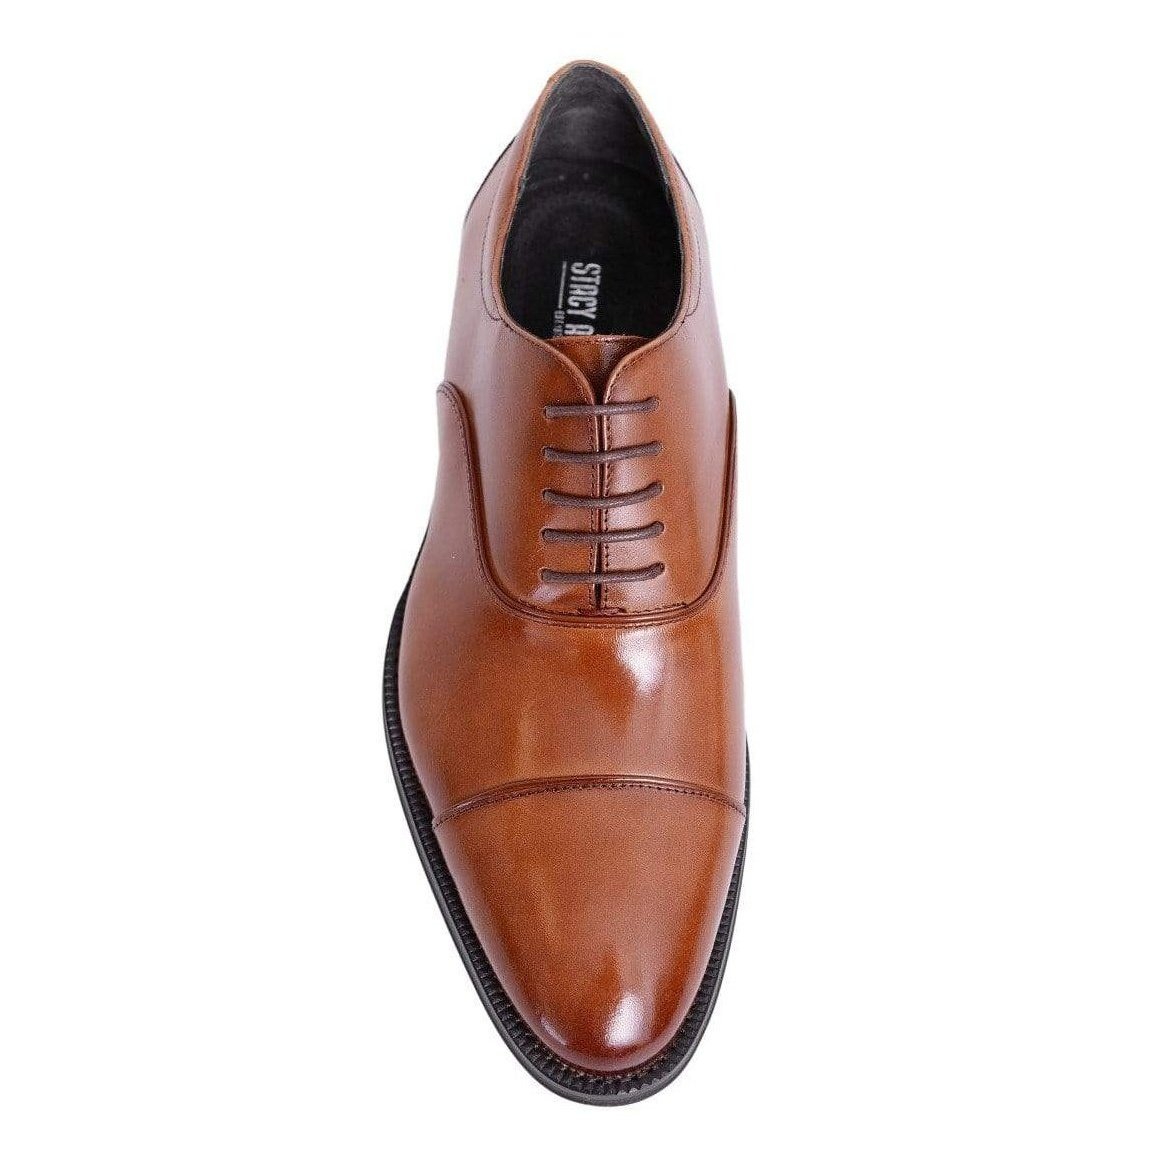 Stacy Adams Shoes For Amazon Stacy Adams Kordell Cognac Oxford Cap Toe Leather Dress Shoes